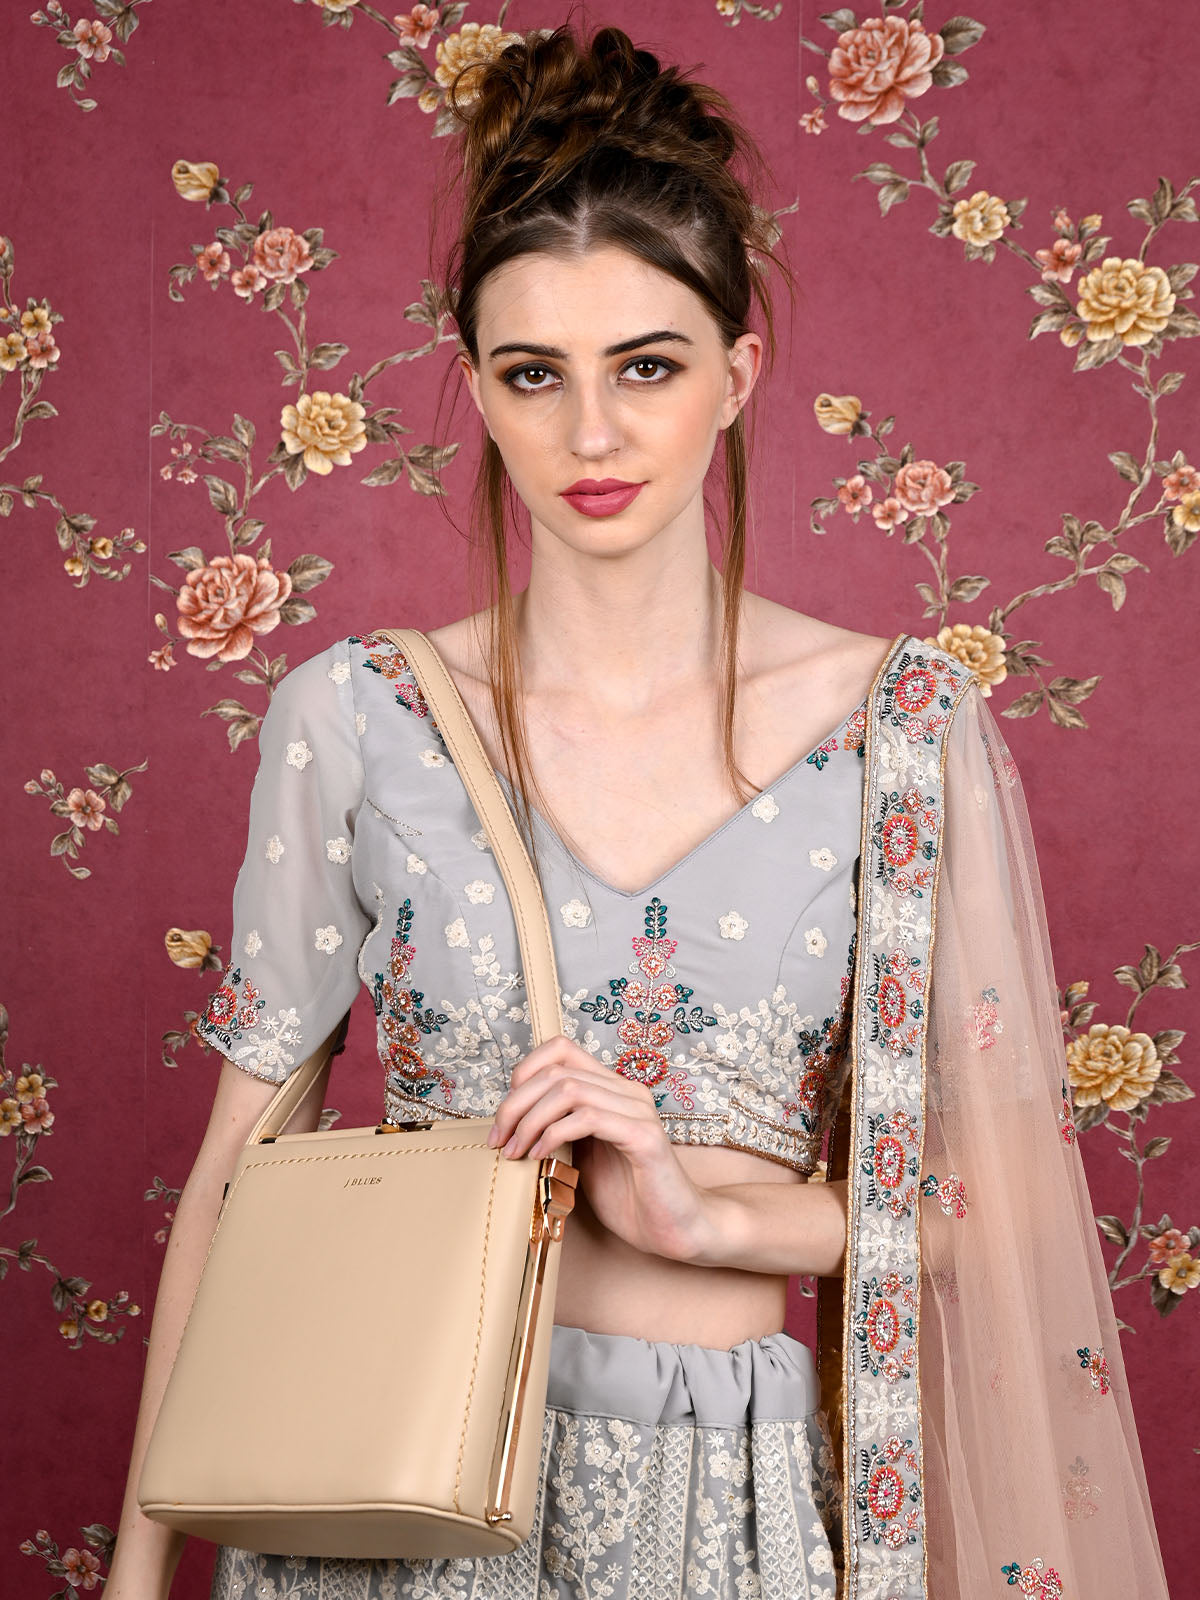 J blues new collection available - Khodal purse& bags | Facebook